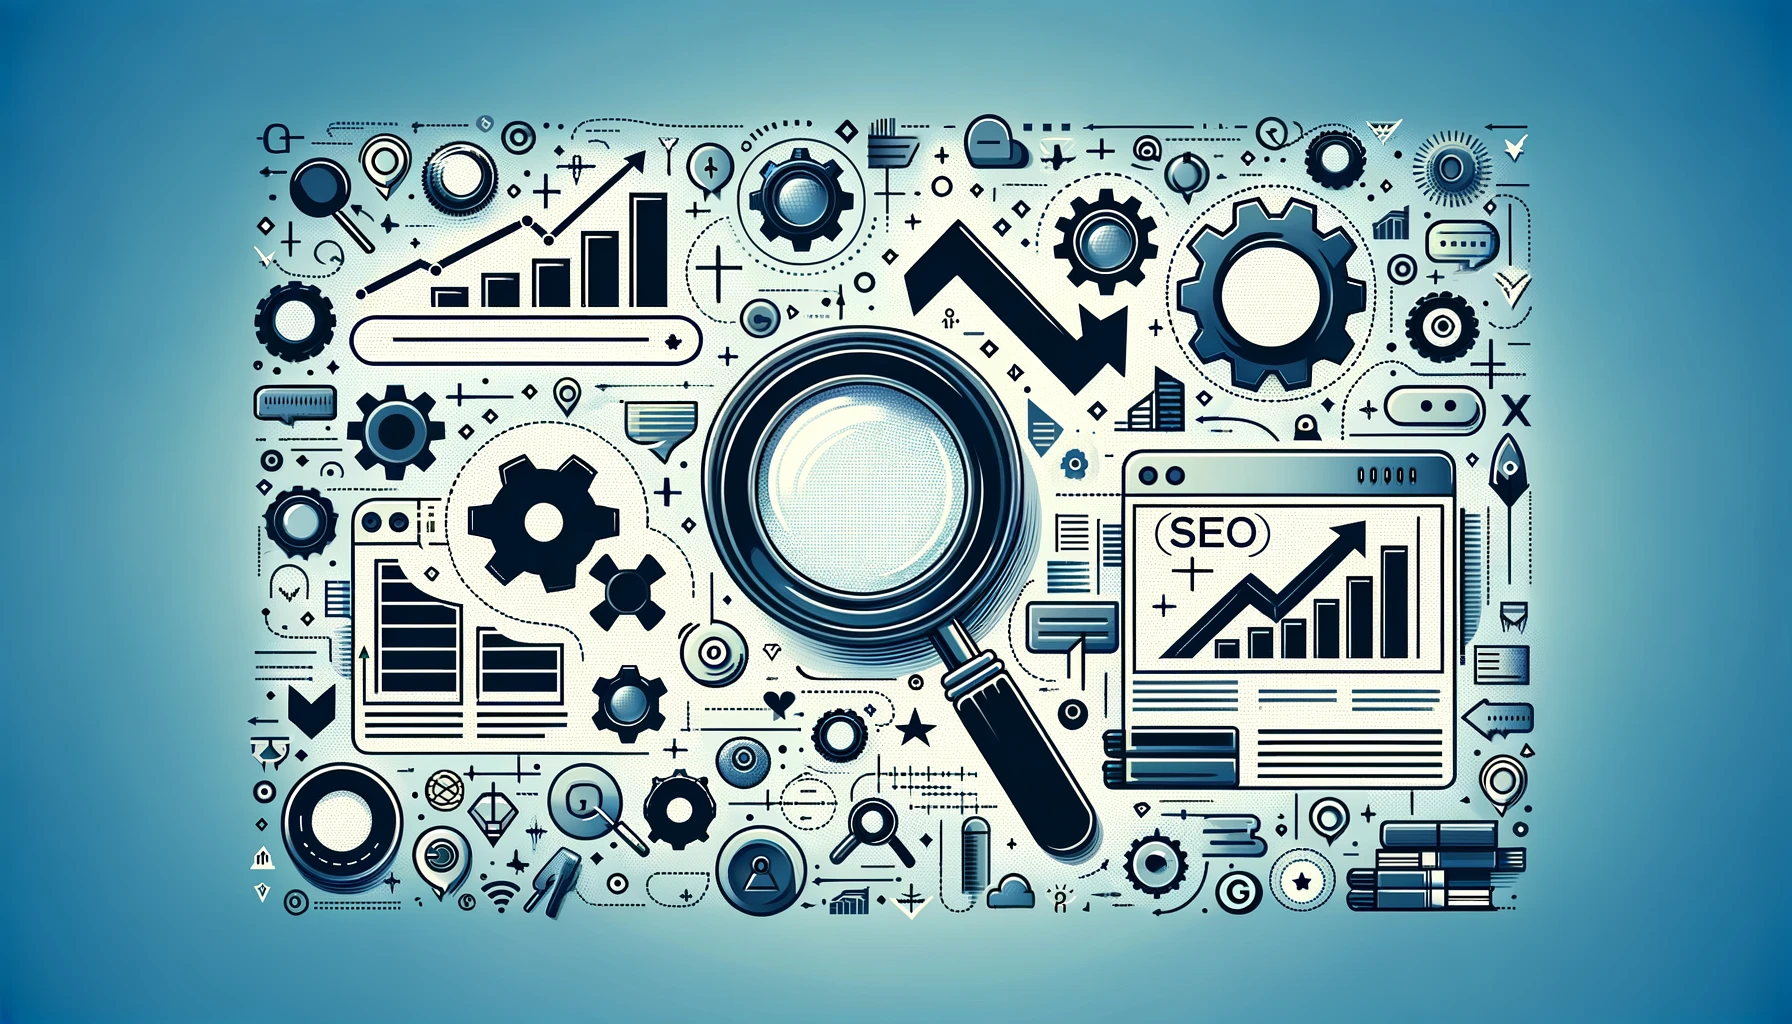 Graphic-Display-SEO-Tools-Magnifying-Glass-Graphs-Gears-Website-Elements-Coding-Symbols-Data-Analysis-Blue-Toned-Illustration